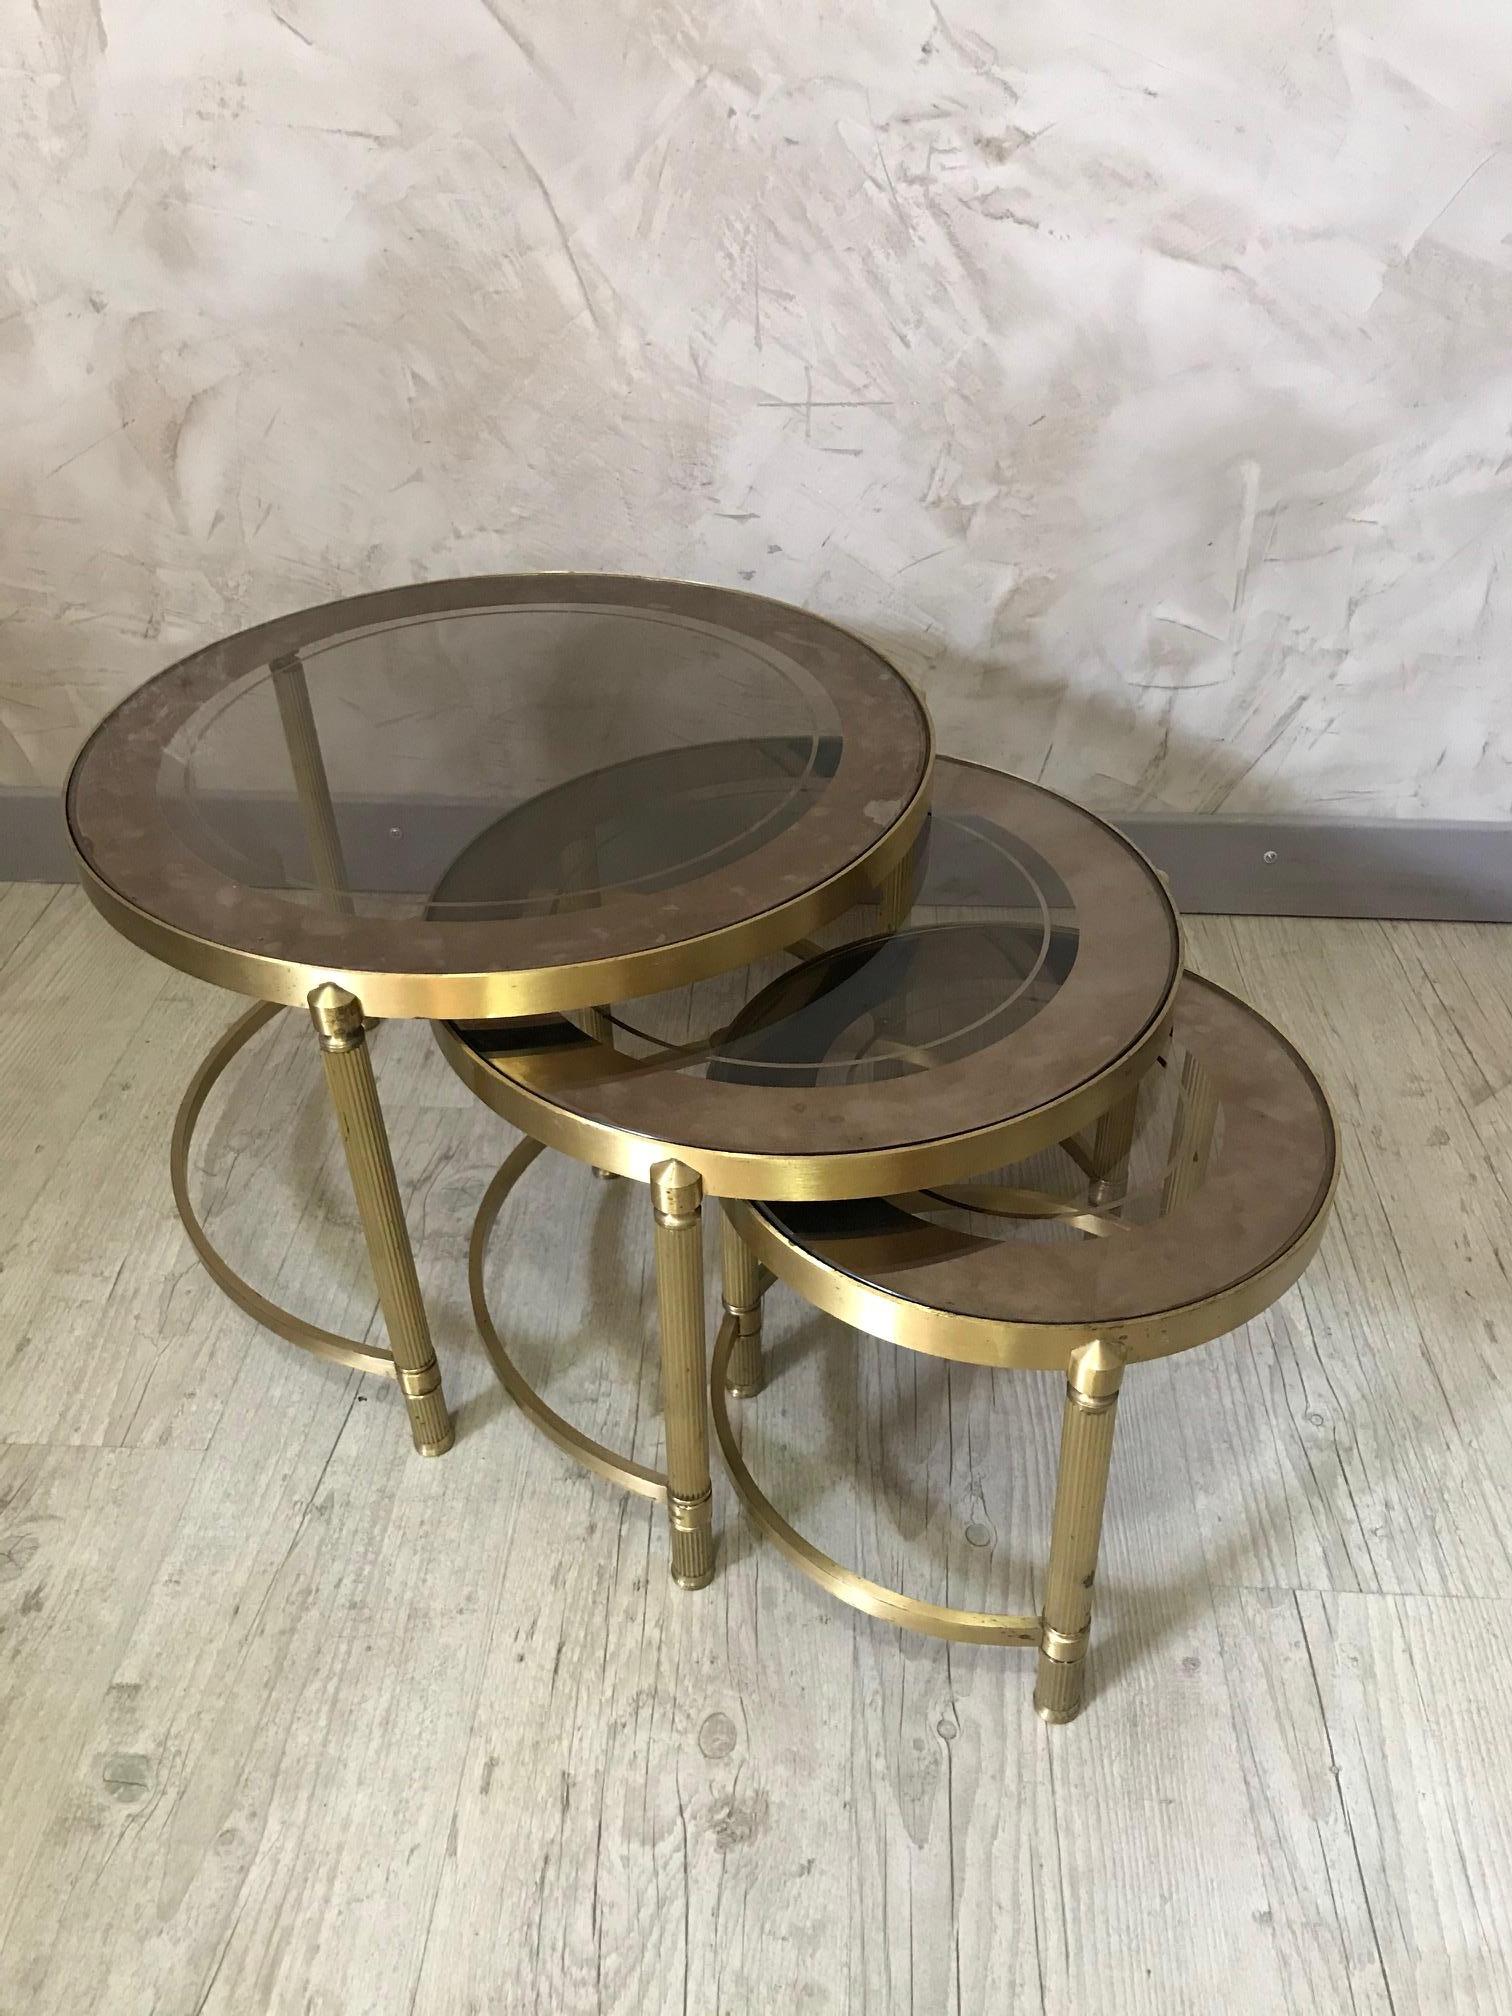 Beautiful 20th century French gilded brass and mercury glass set of 3 nesting tables from the 1950s. 
The glass are removable. Each table can be tidy up under the largest one. 
Very good quality of brass and glass.
 